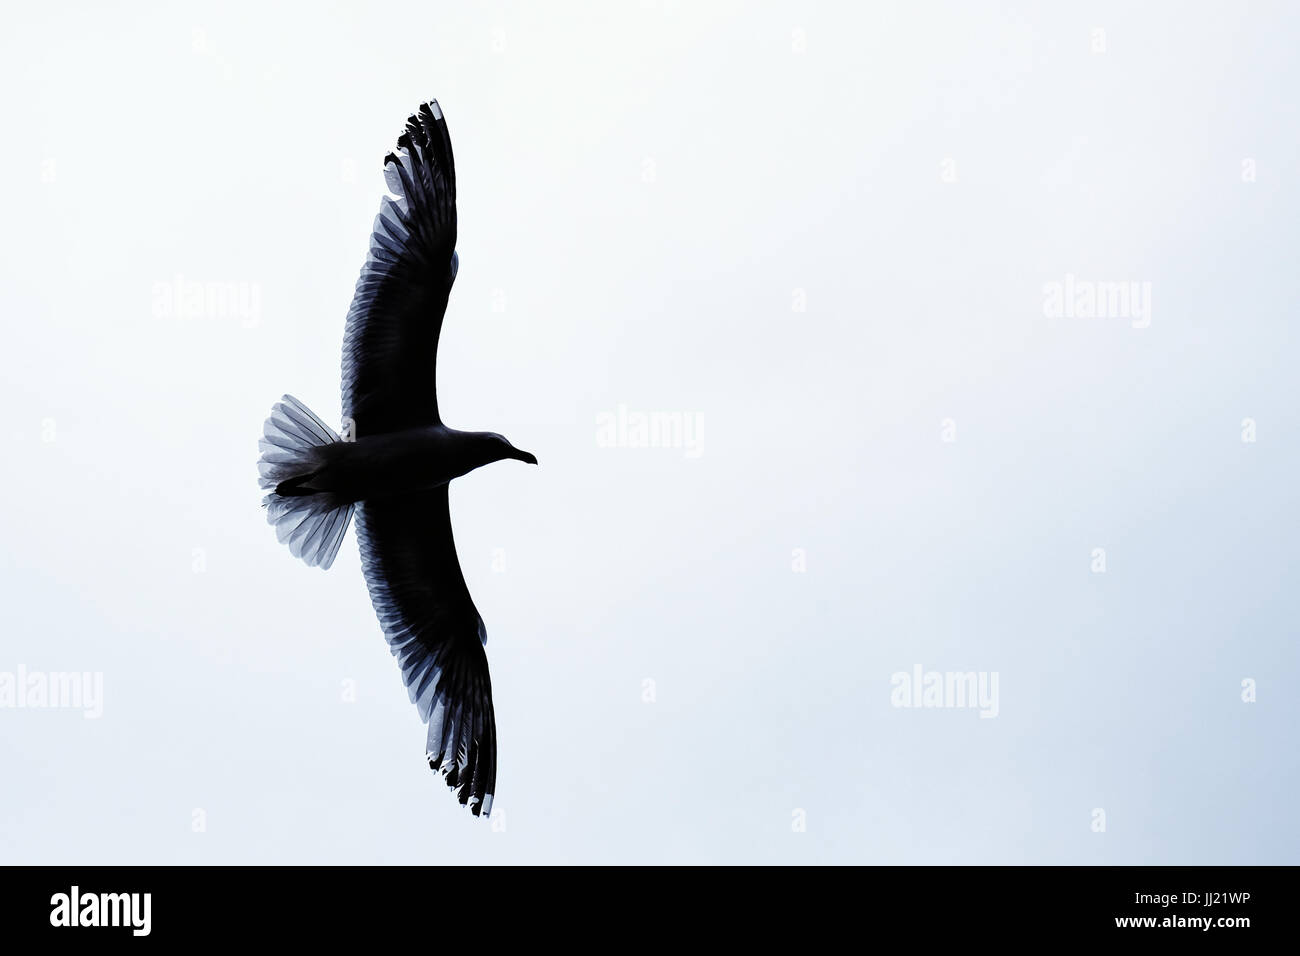 A common gull in flight, backlit to show the structure of its outstretched wings and feathers. Stock Photo